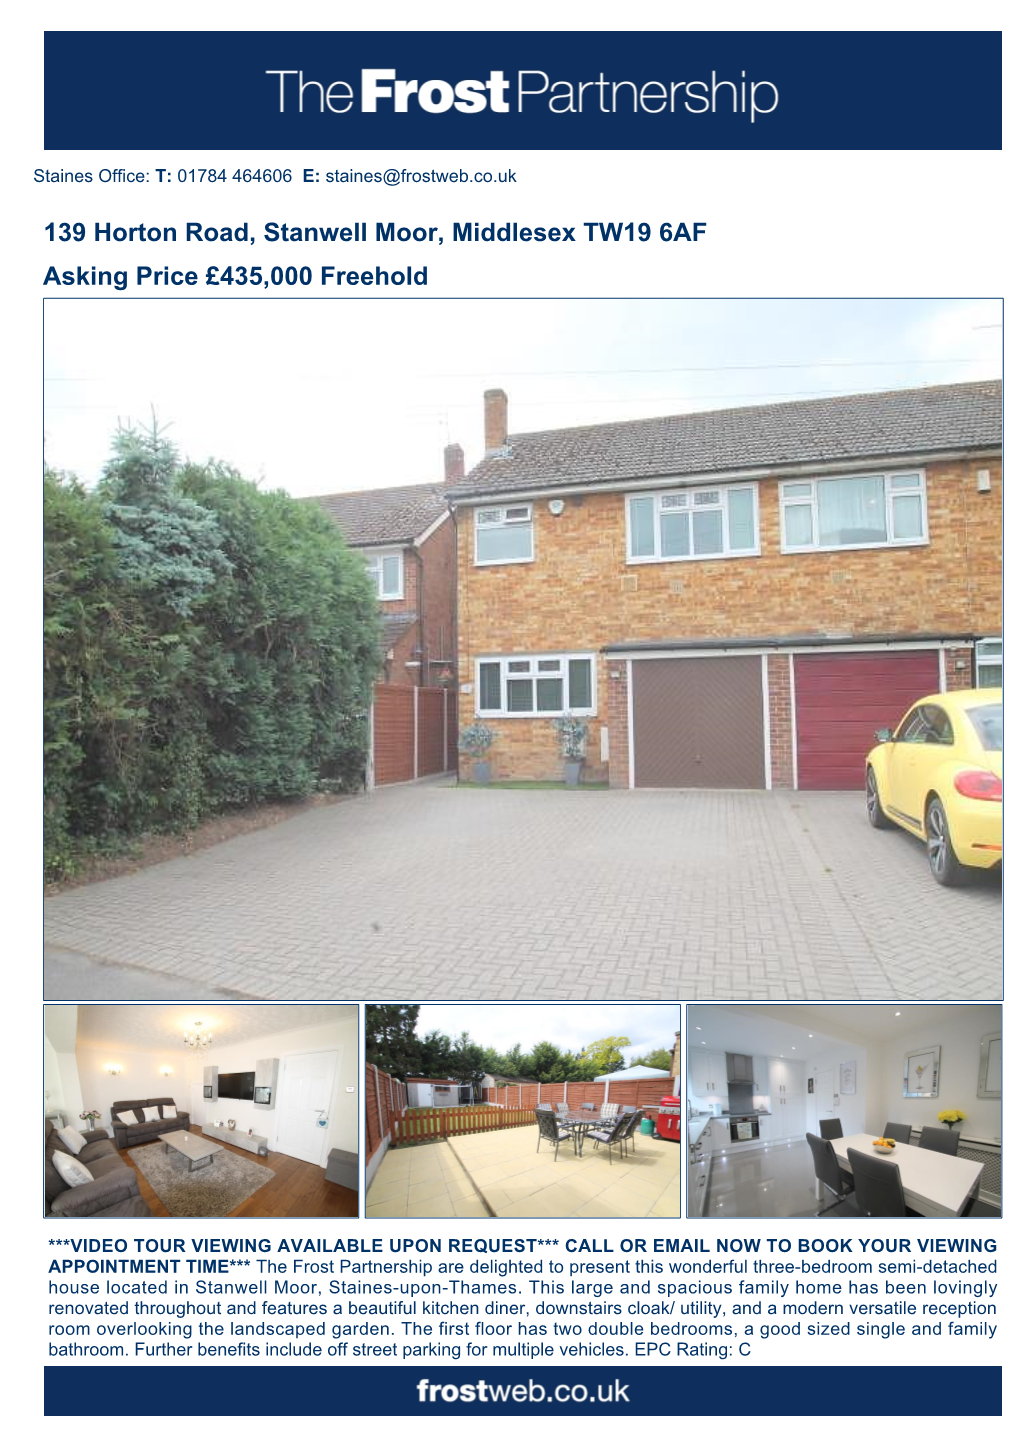 139 Horton Road, Stanwell Moor, Middlesex TW19 6AF Asking Price £435,000 Freehold